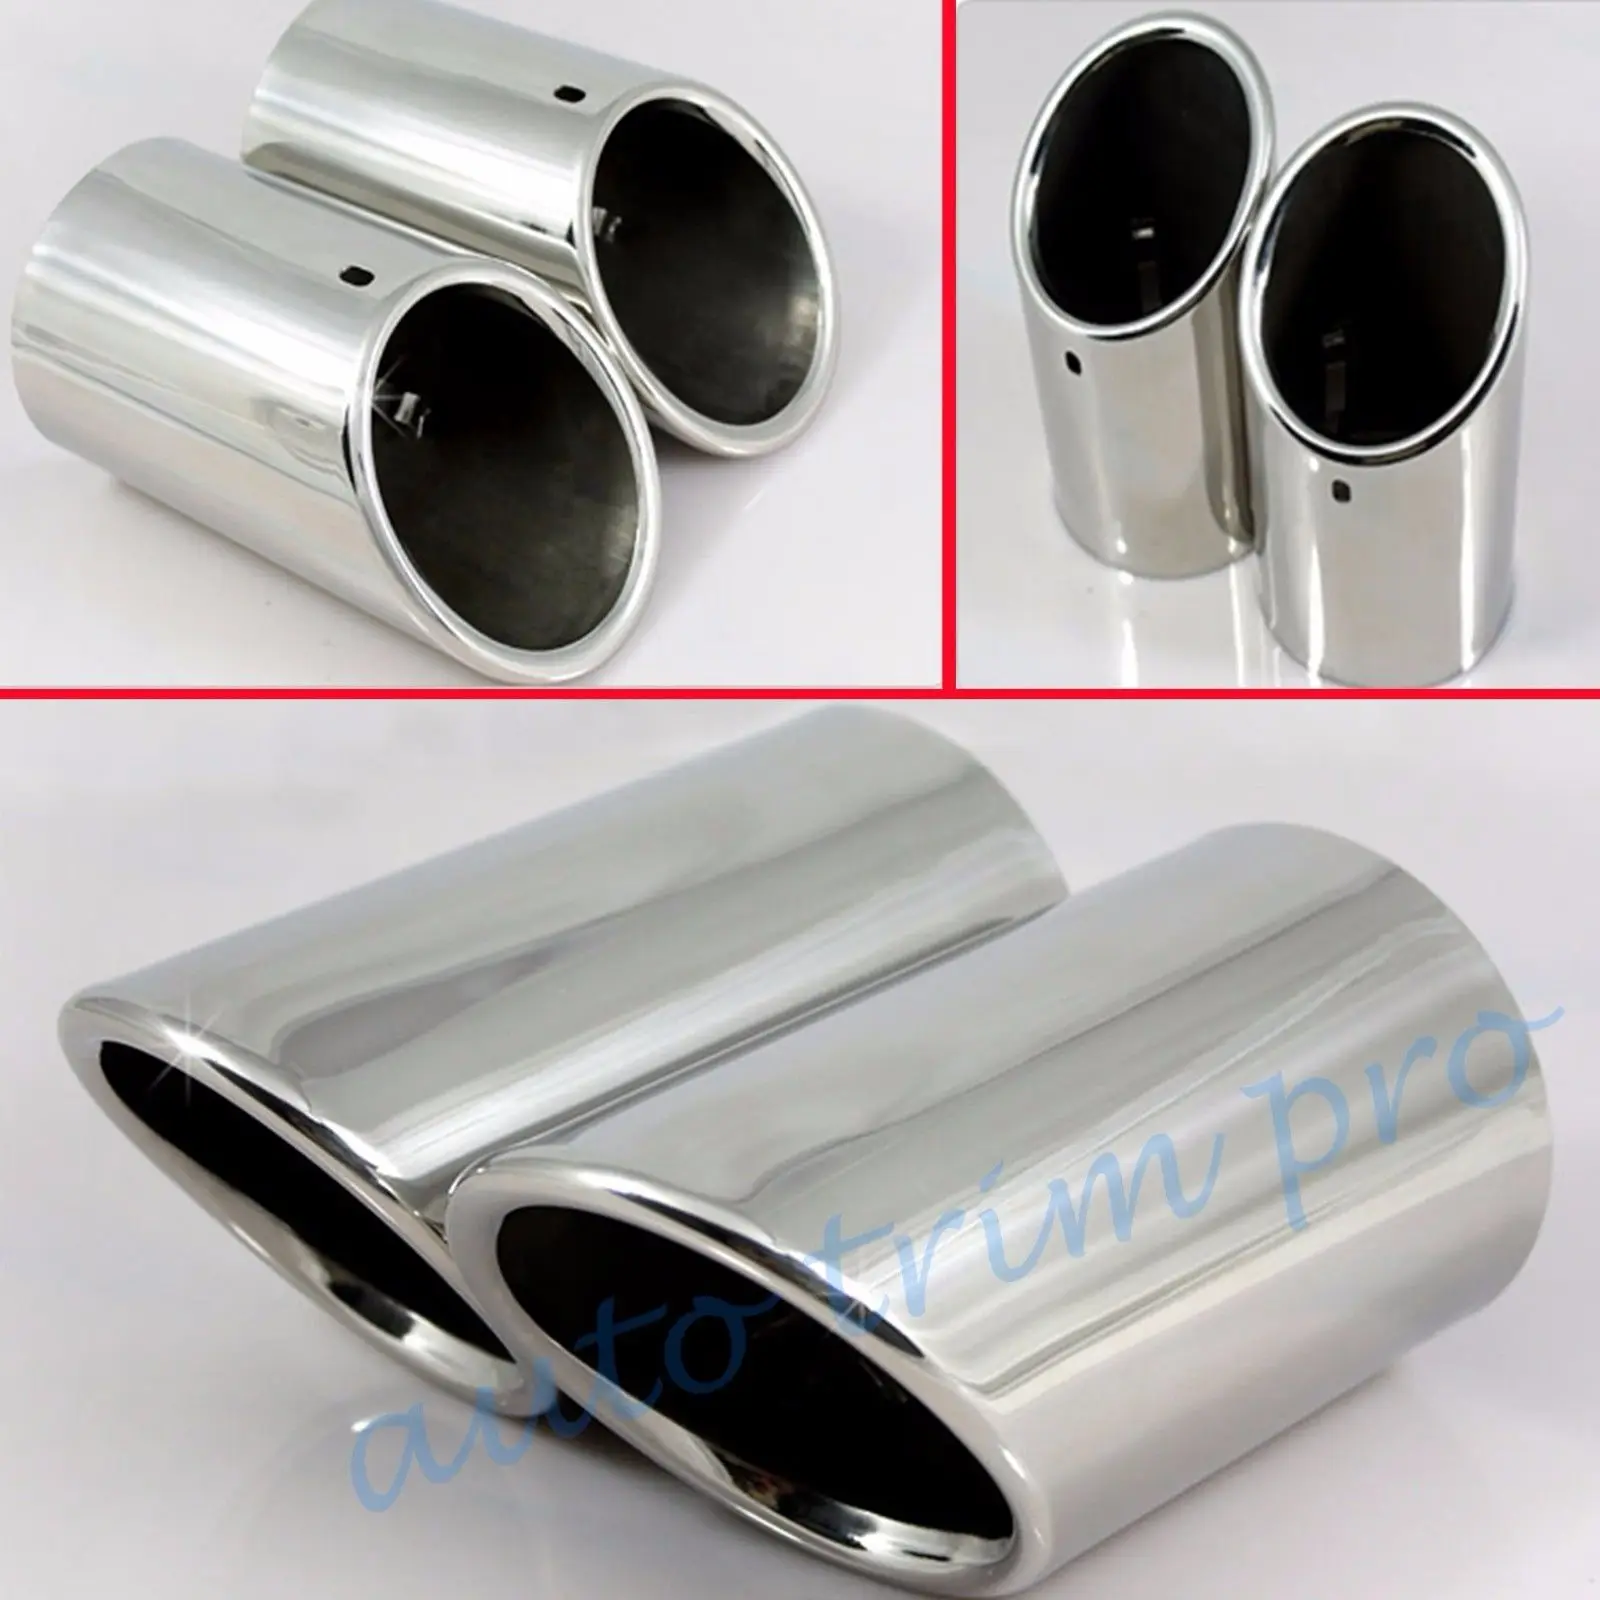 

Chrome Rear Muffler Tail Exhaust Tailpipe Silencer Trim Fit For Audi A1 A3 Q5 2012-2017 Accessories